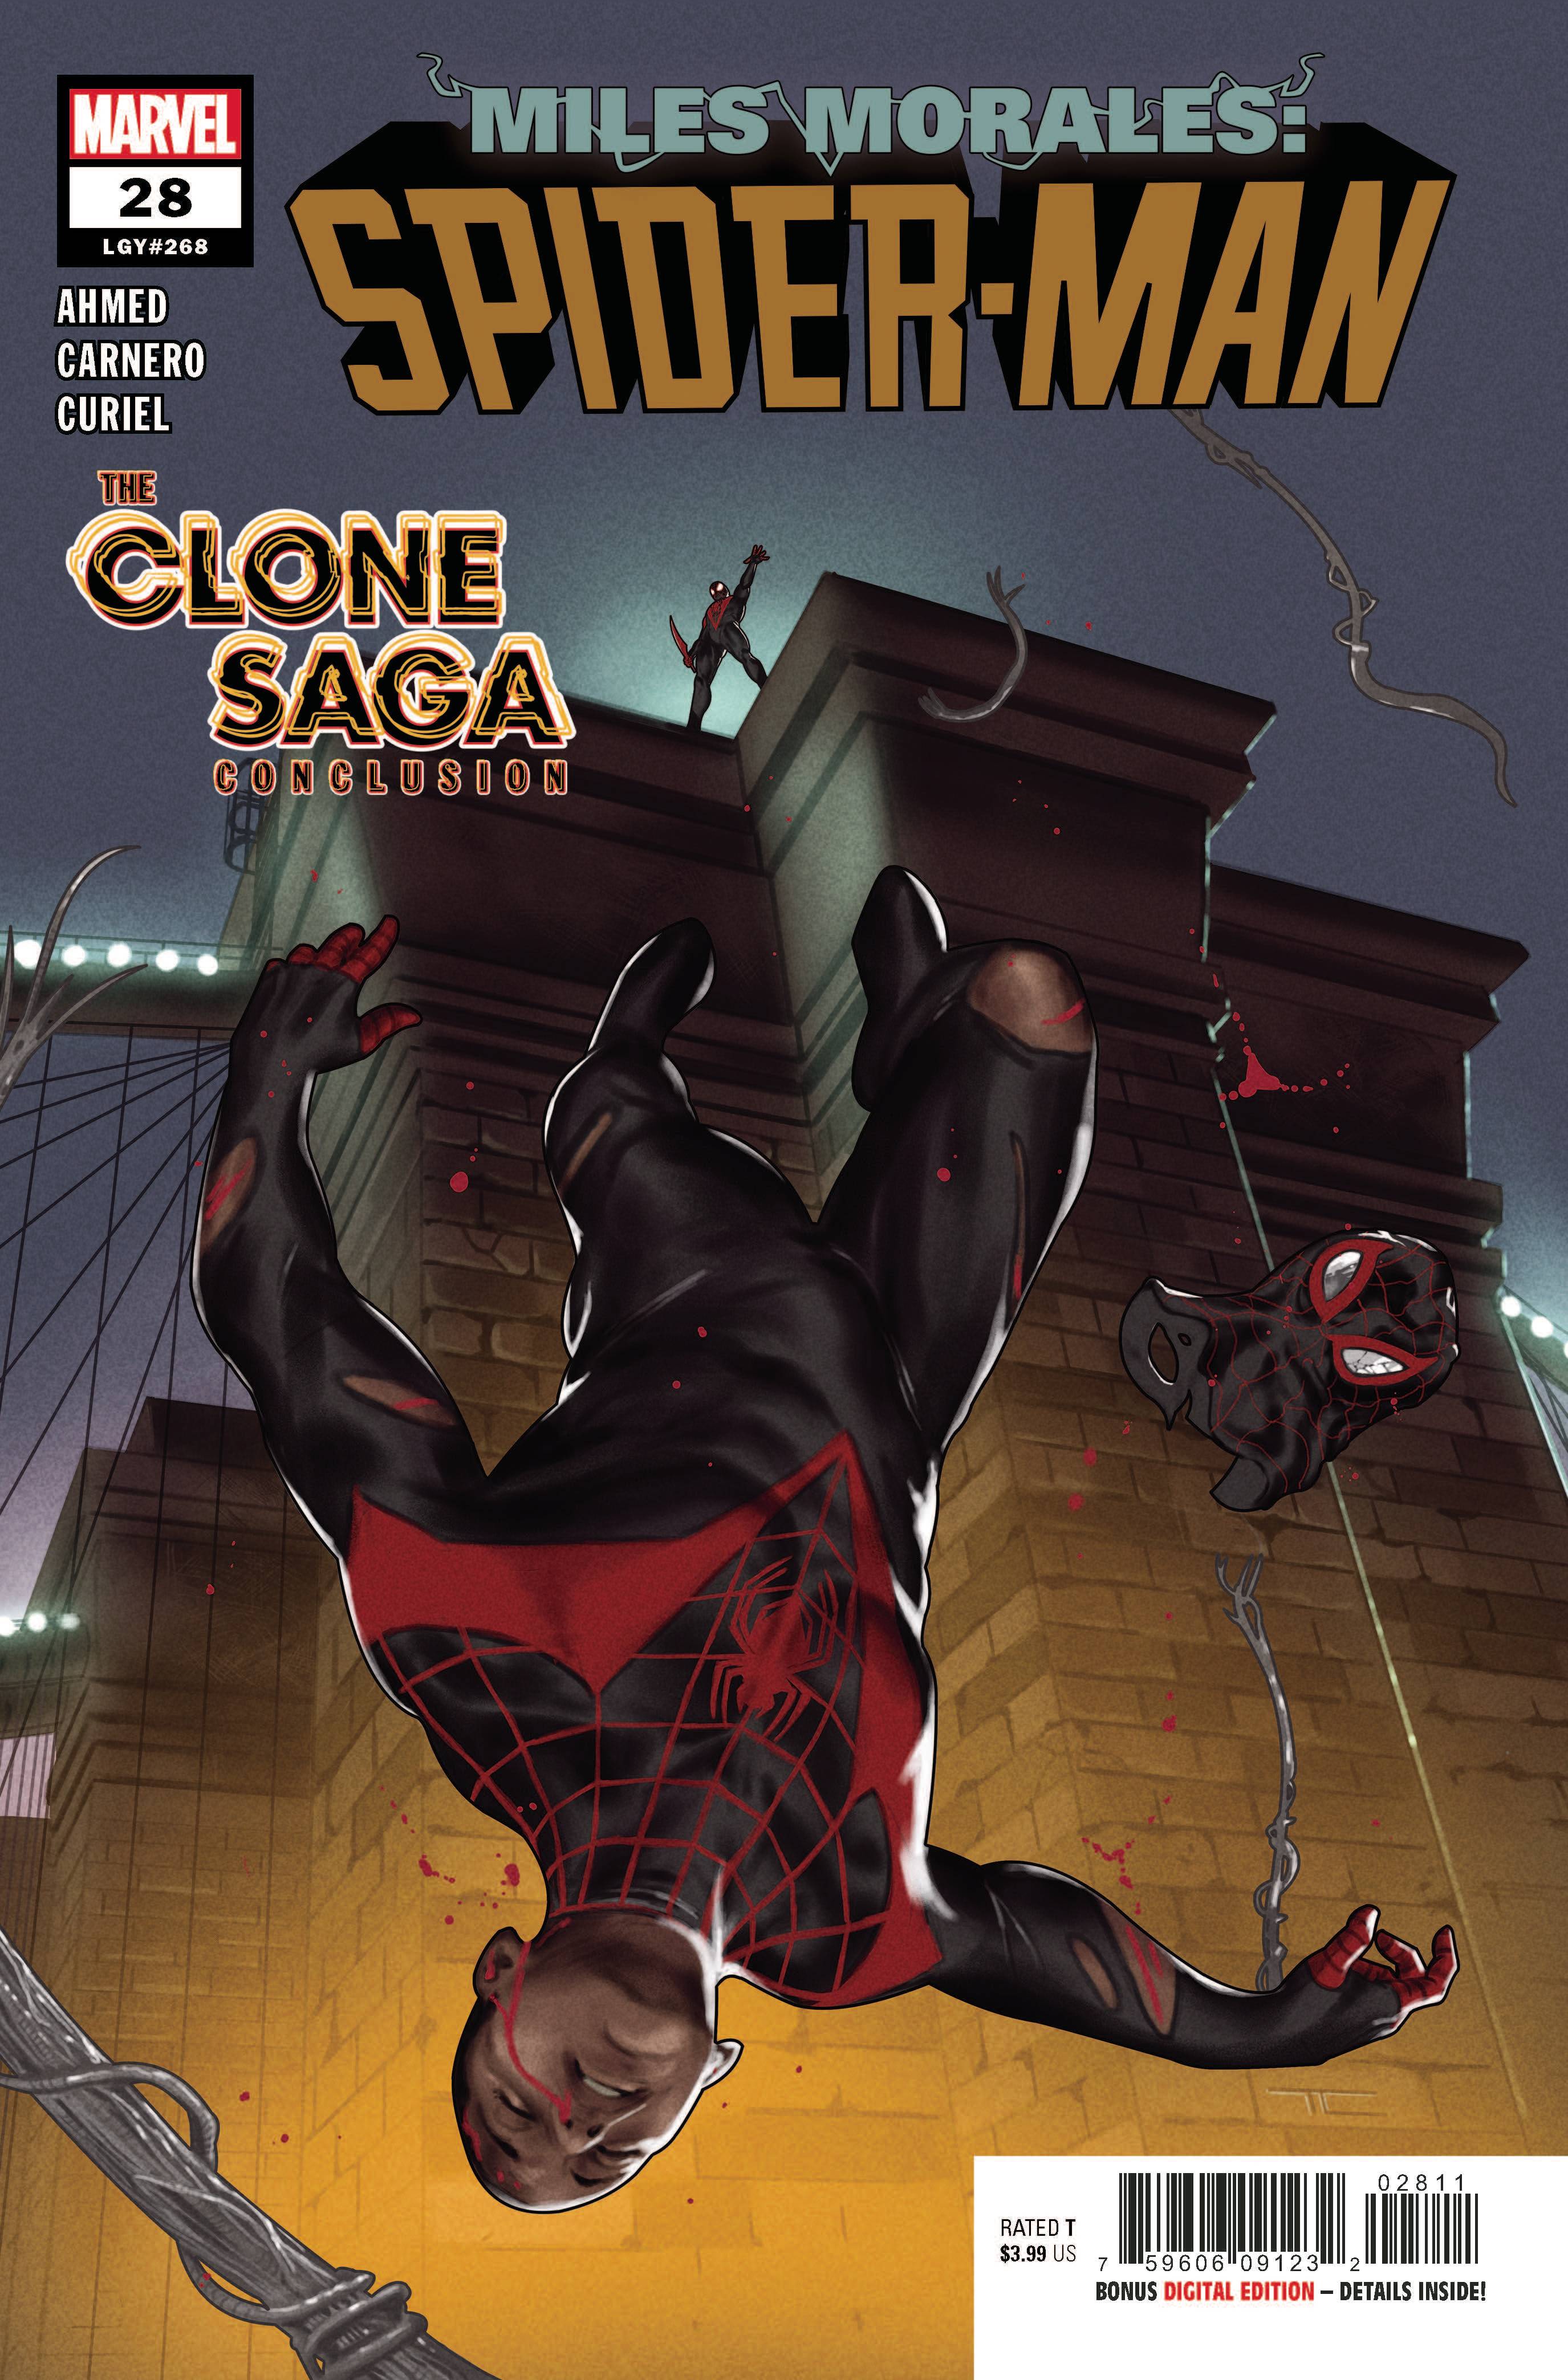 Photo of Miles Morales Spider-Man Issue 28 comic sold by Stronghold Collectibles